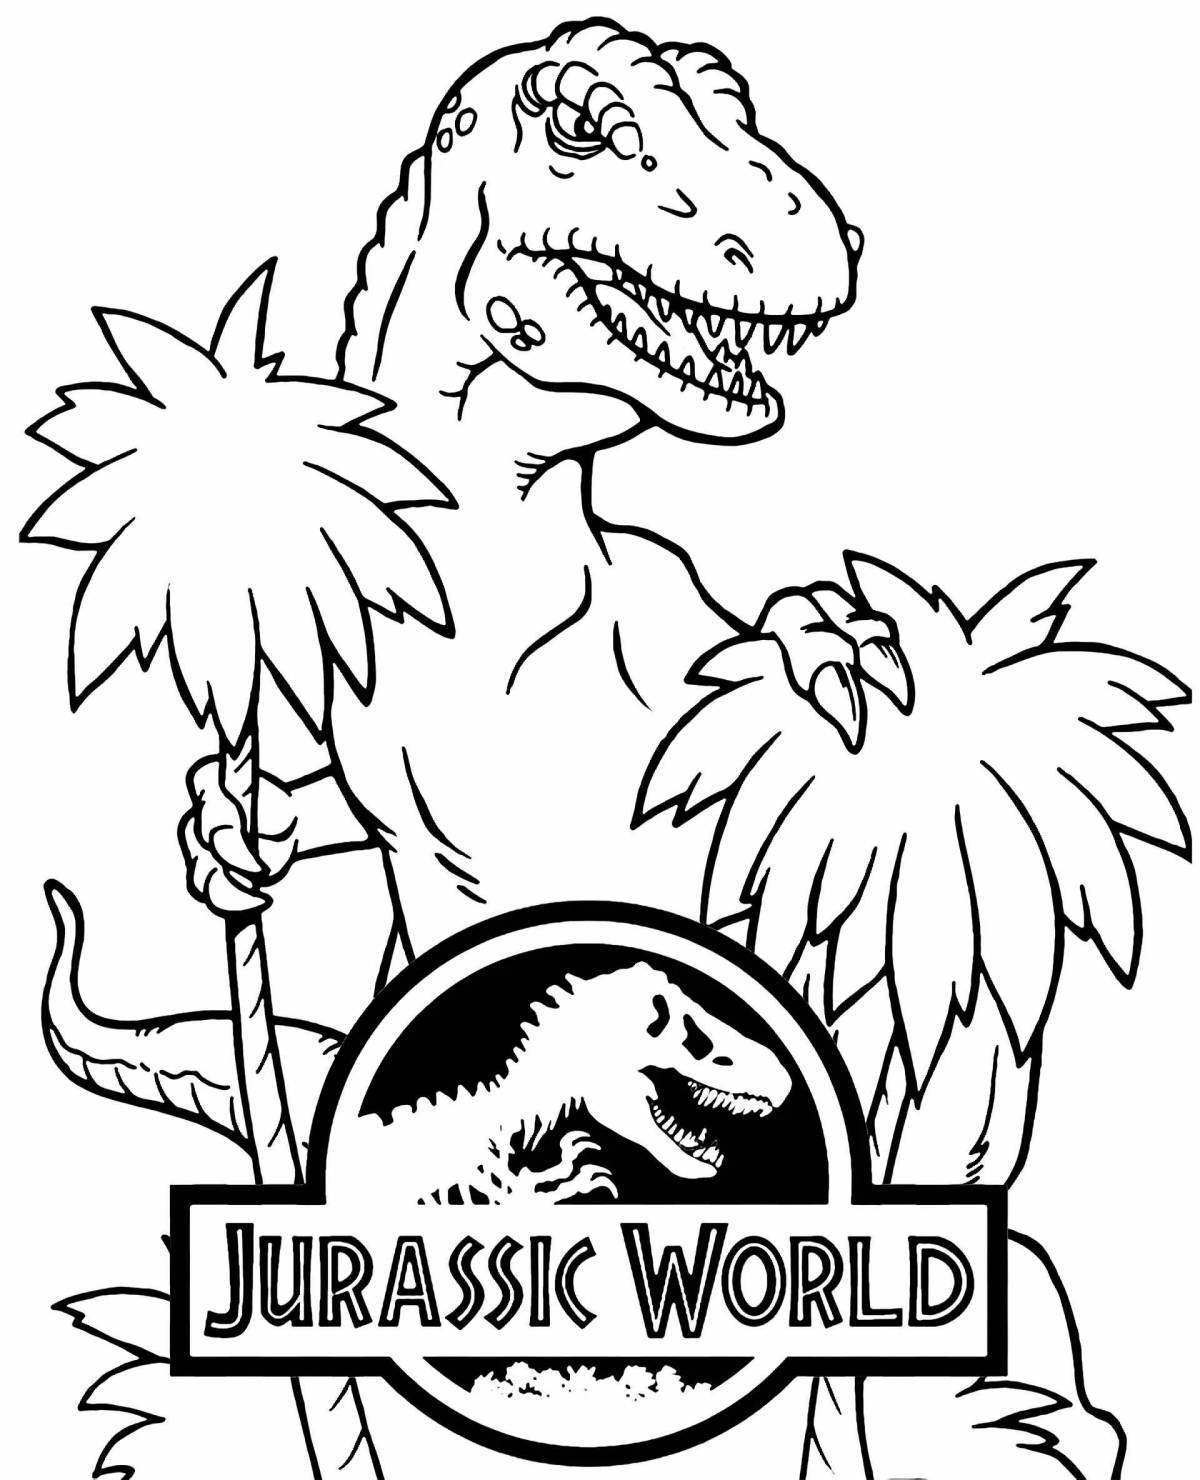 Intriguing lego dinosaurs jurassic world coloring page